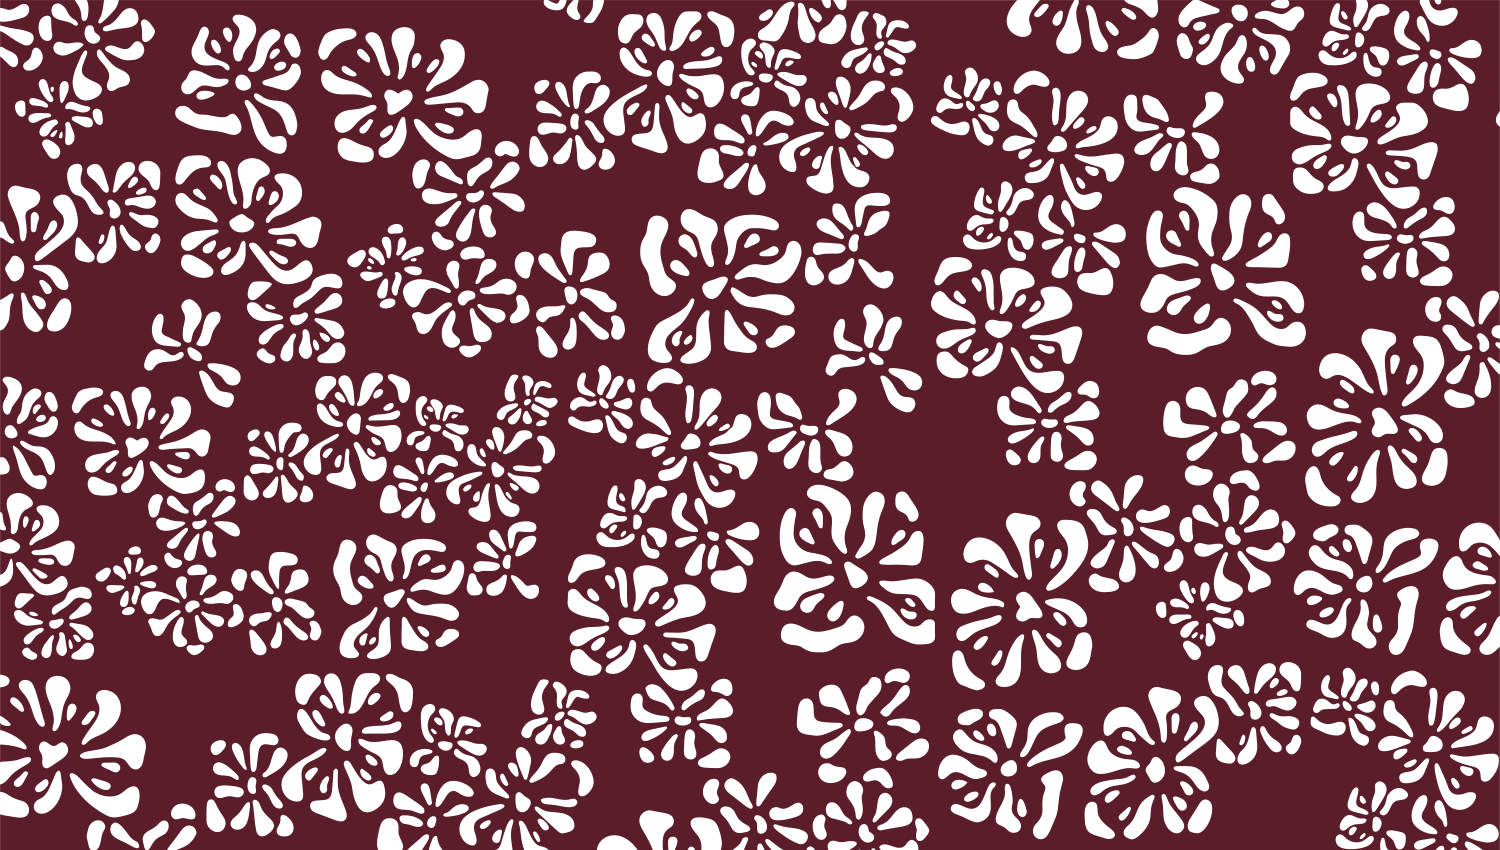 Parasoleil™ Magnolia© pattern displayed with a burgundy color overlay